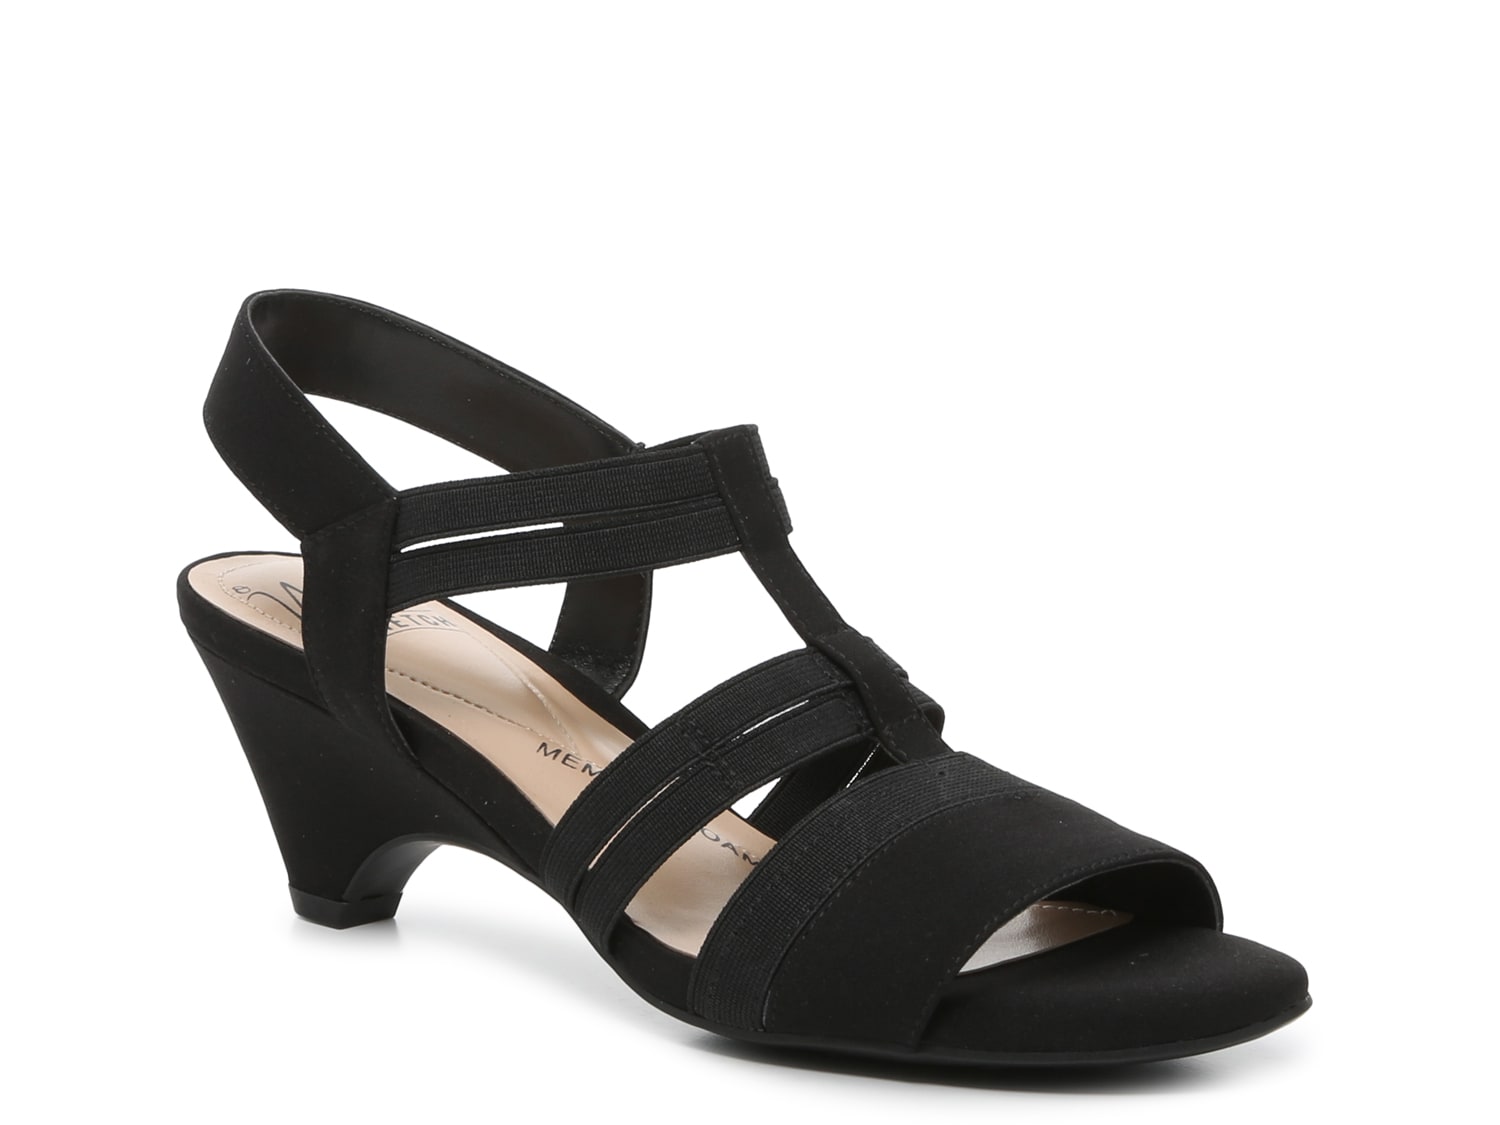 Impo Emerson Sandal - Free Shipping | DSW